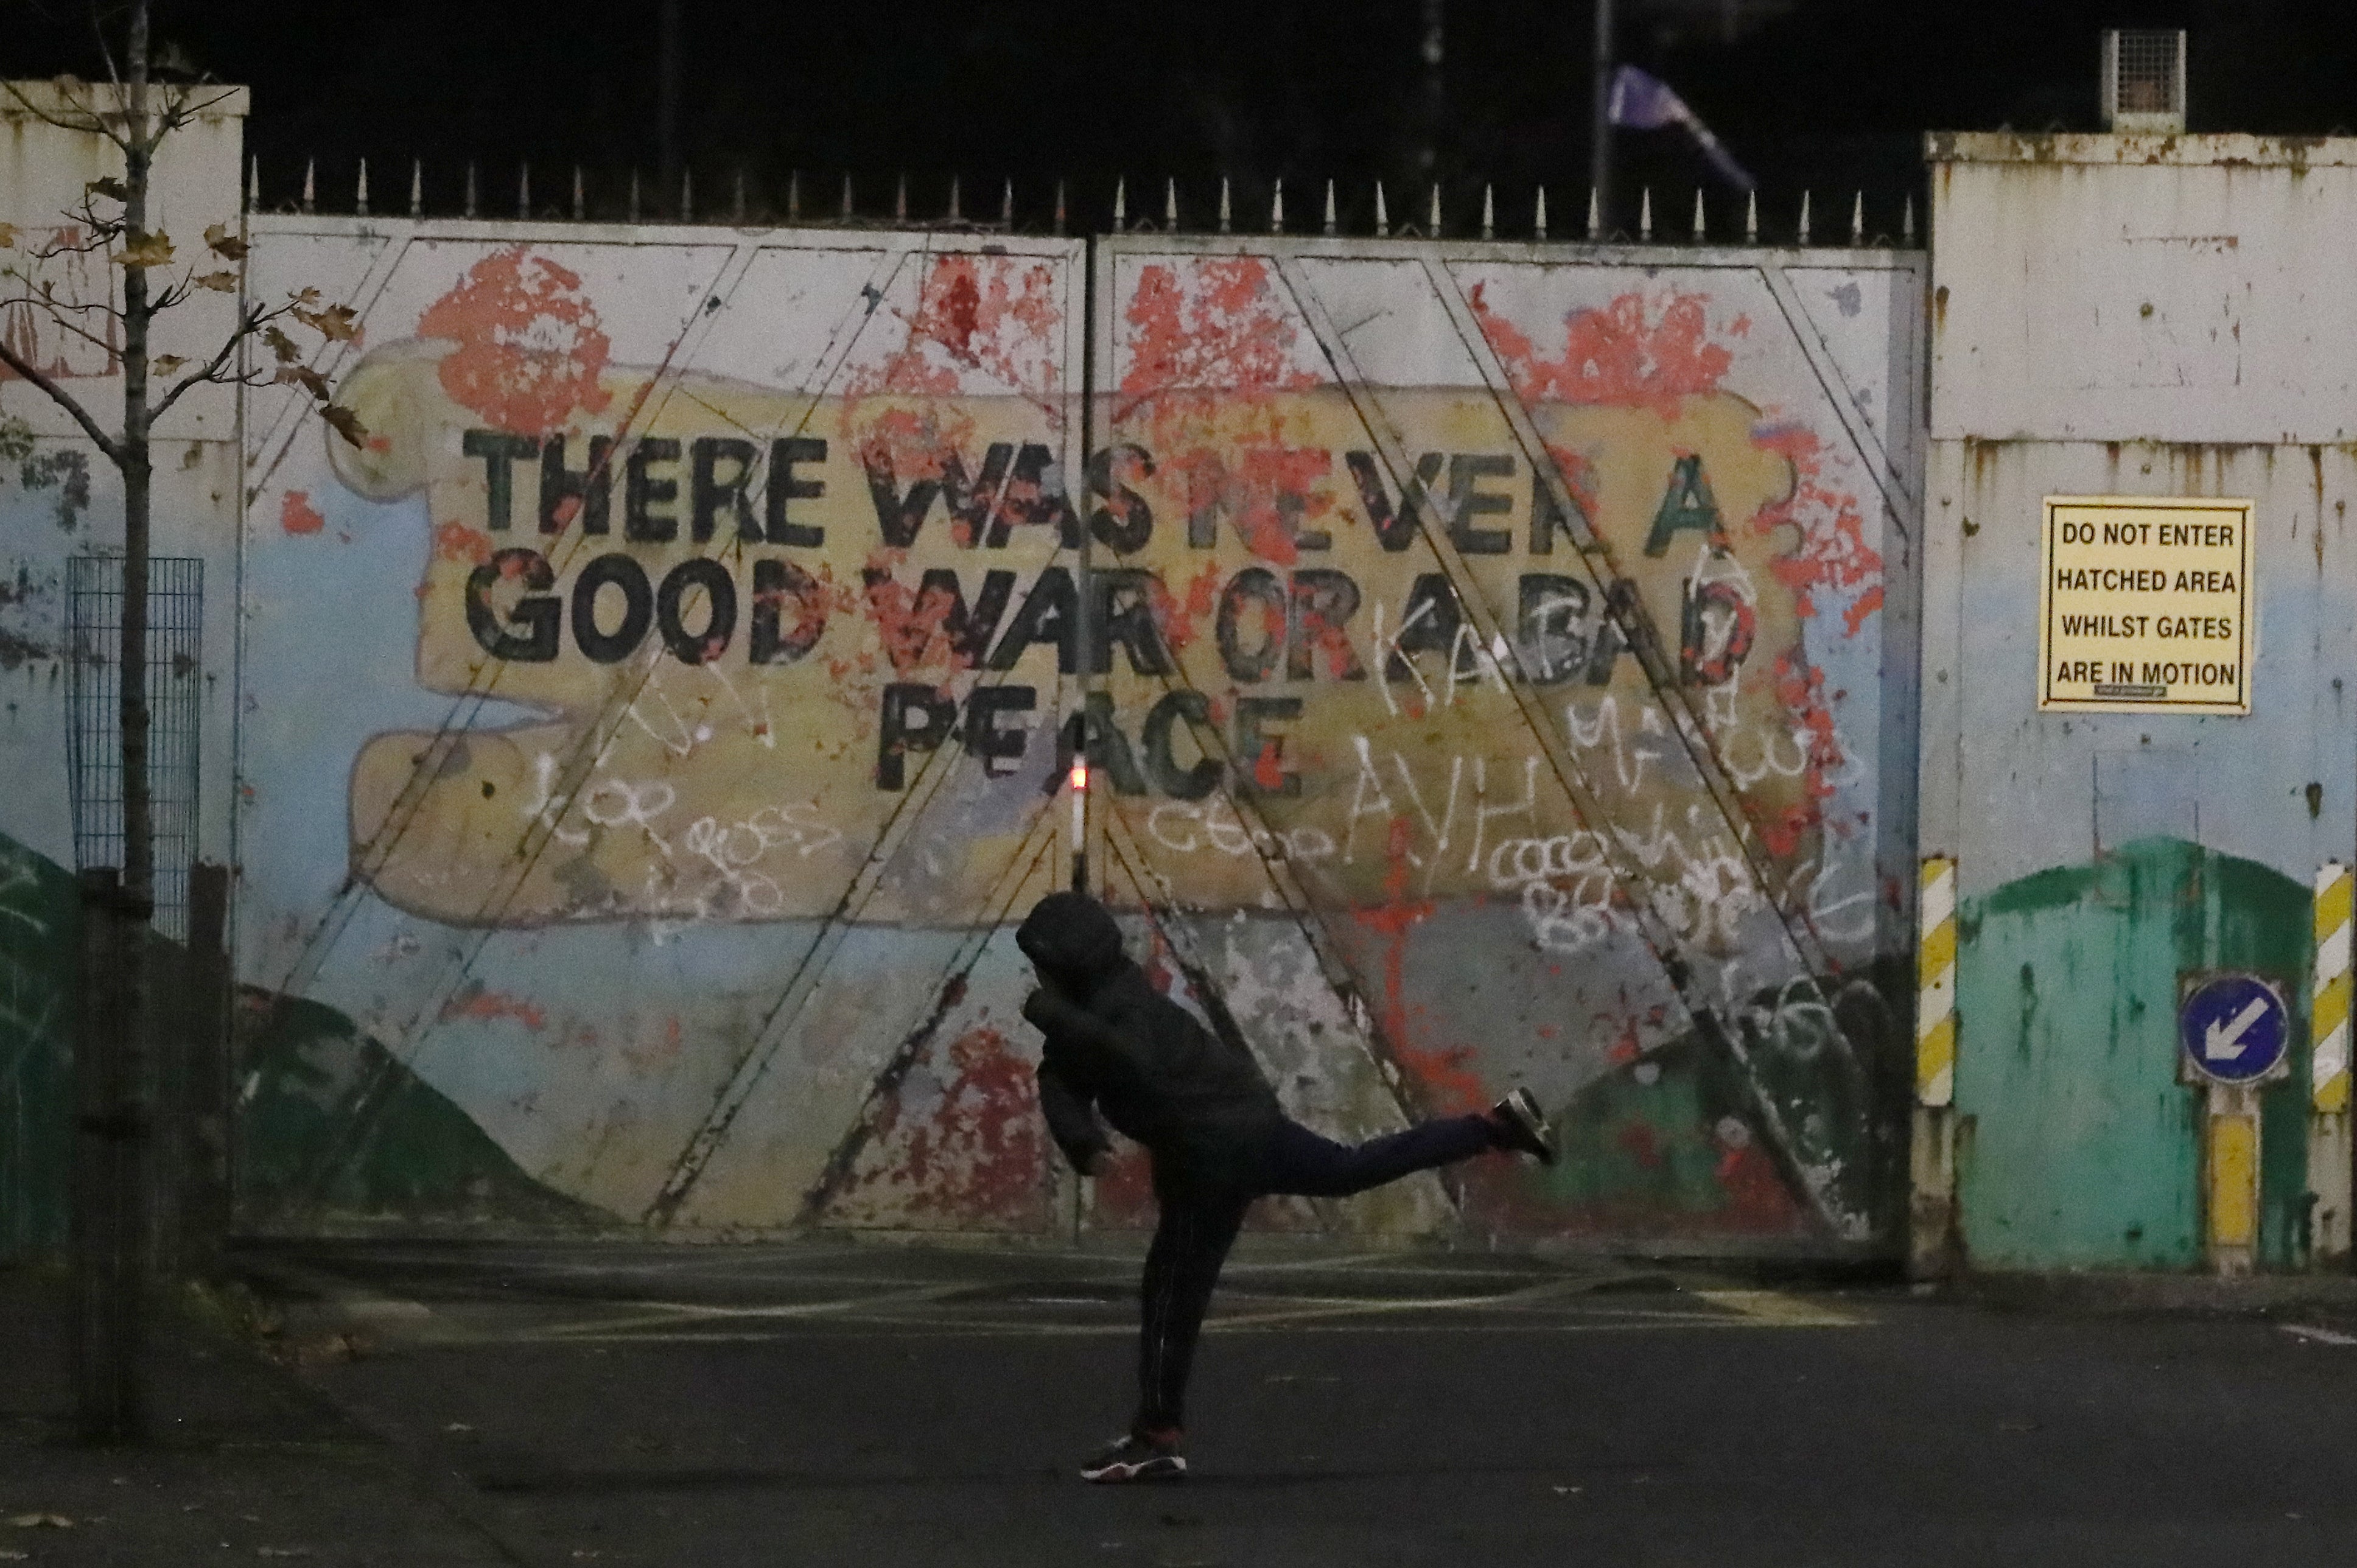 A protestor on Lanark Way in the Loyalist Shankill Road area close to the peace wall during a protest against the protocol in November (Brian Lawless/PA)